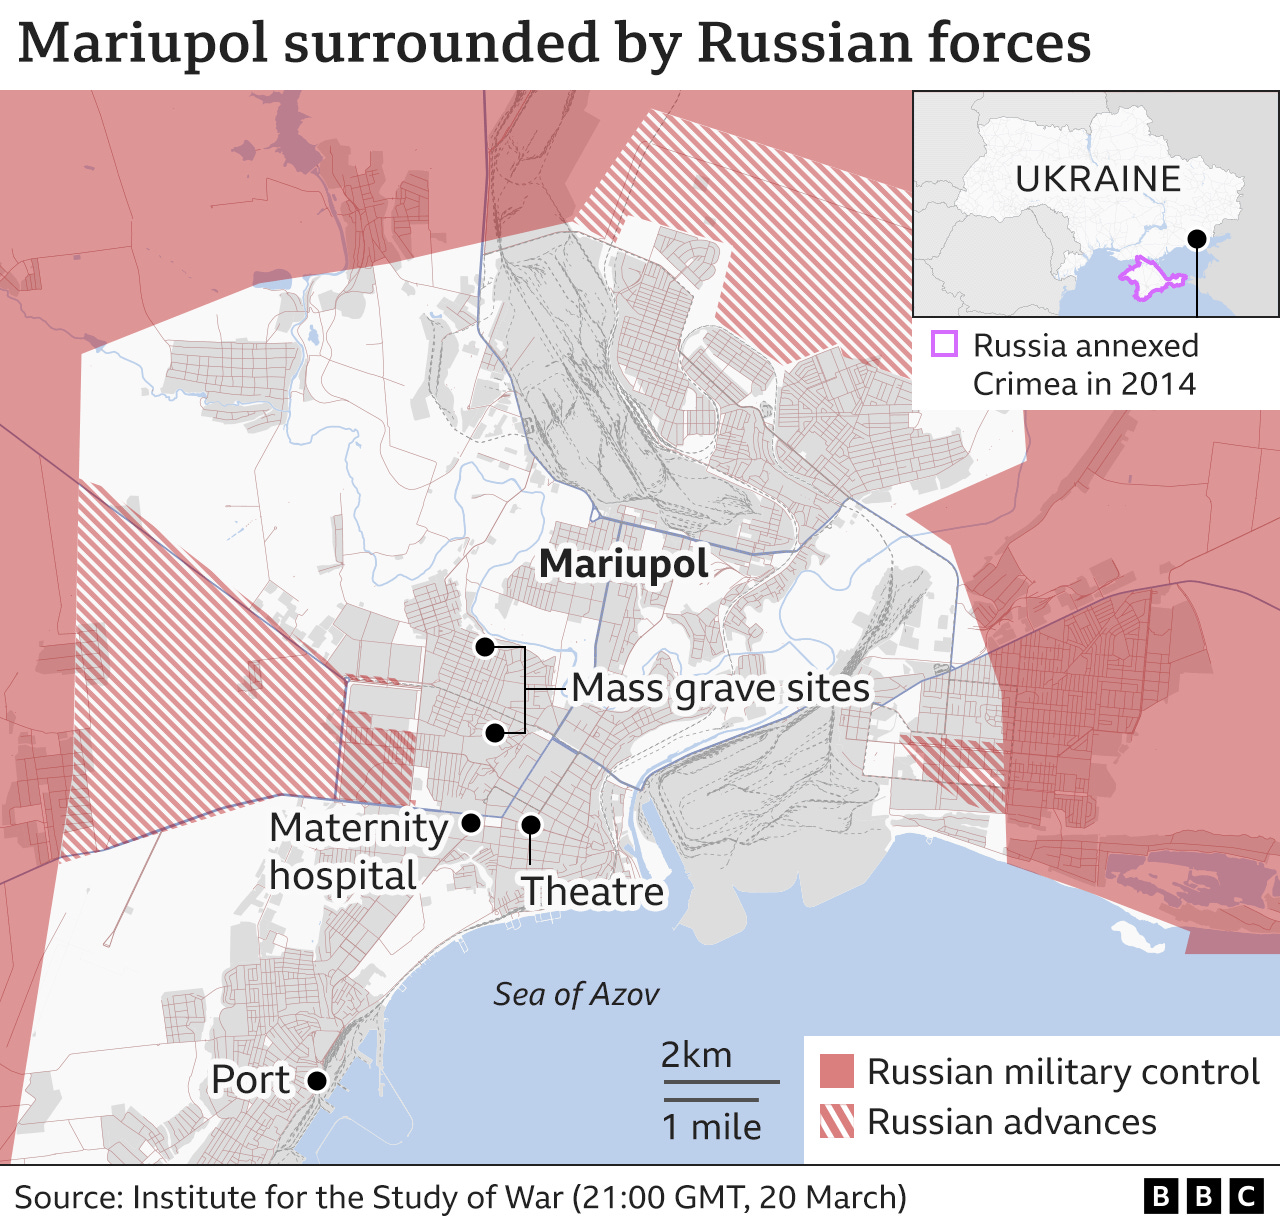 Mariupol: Why Mariupol is so important to Russia's plan - BBC News